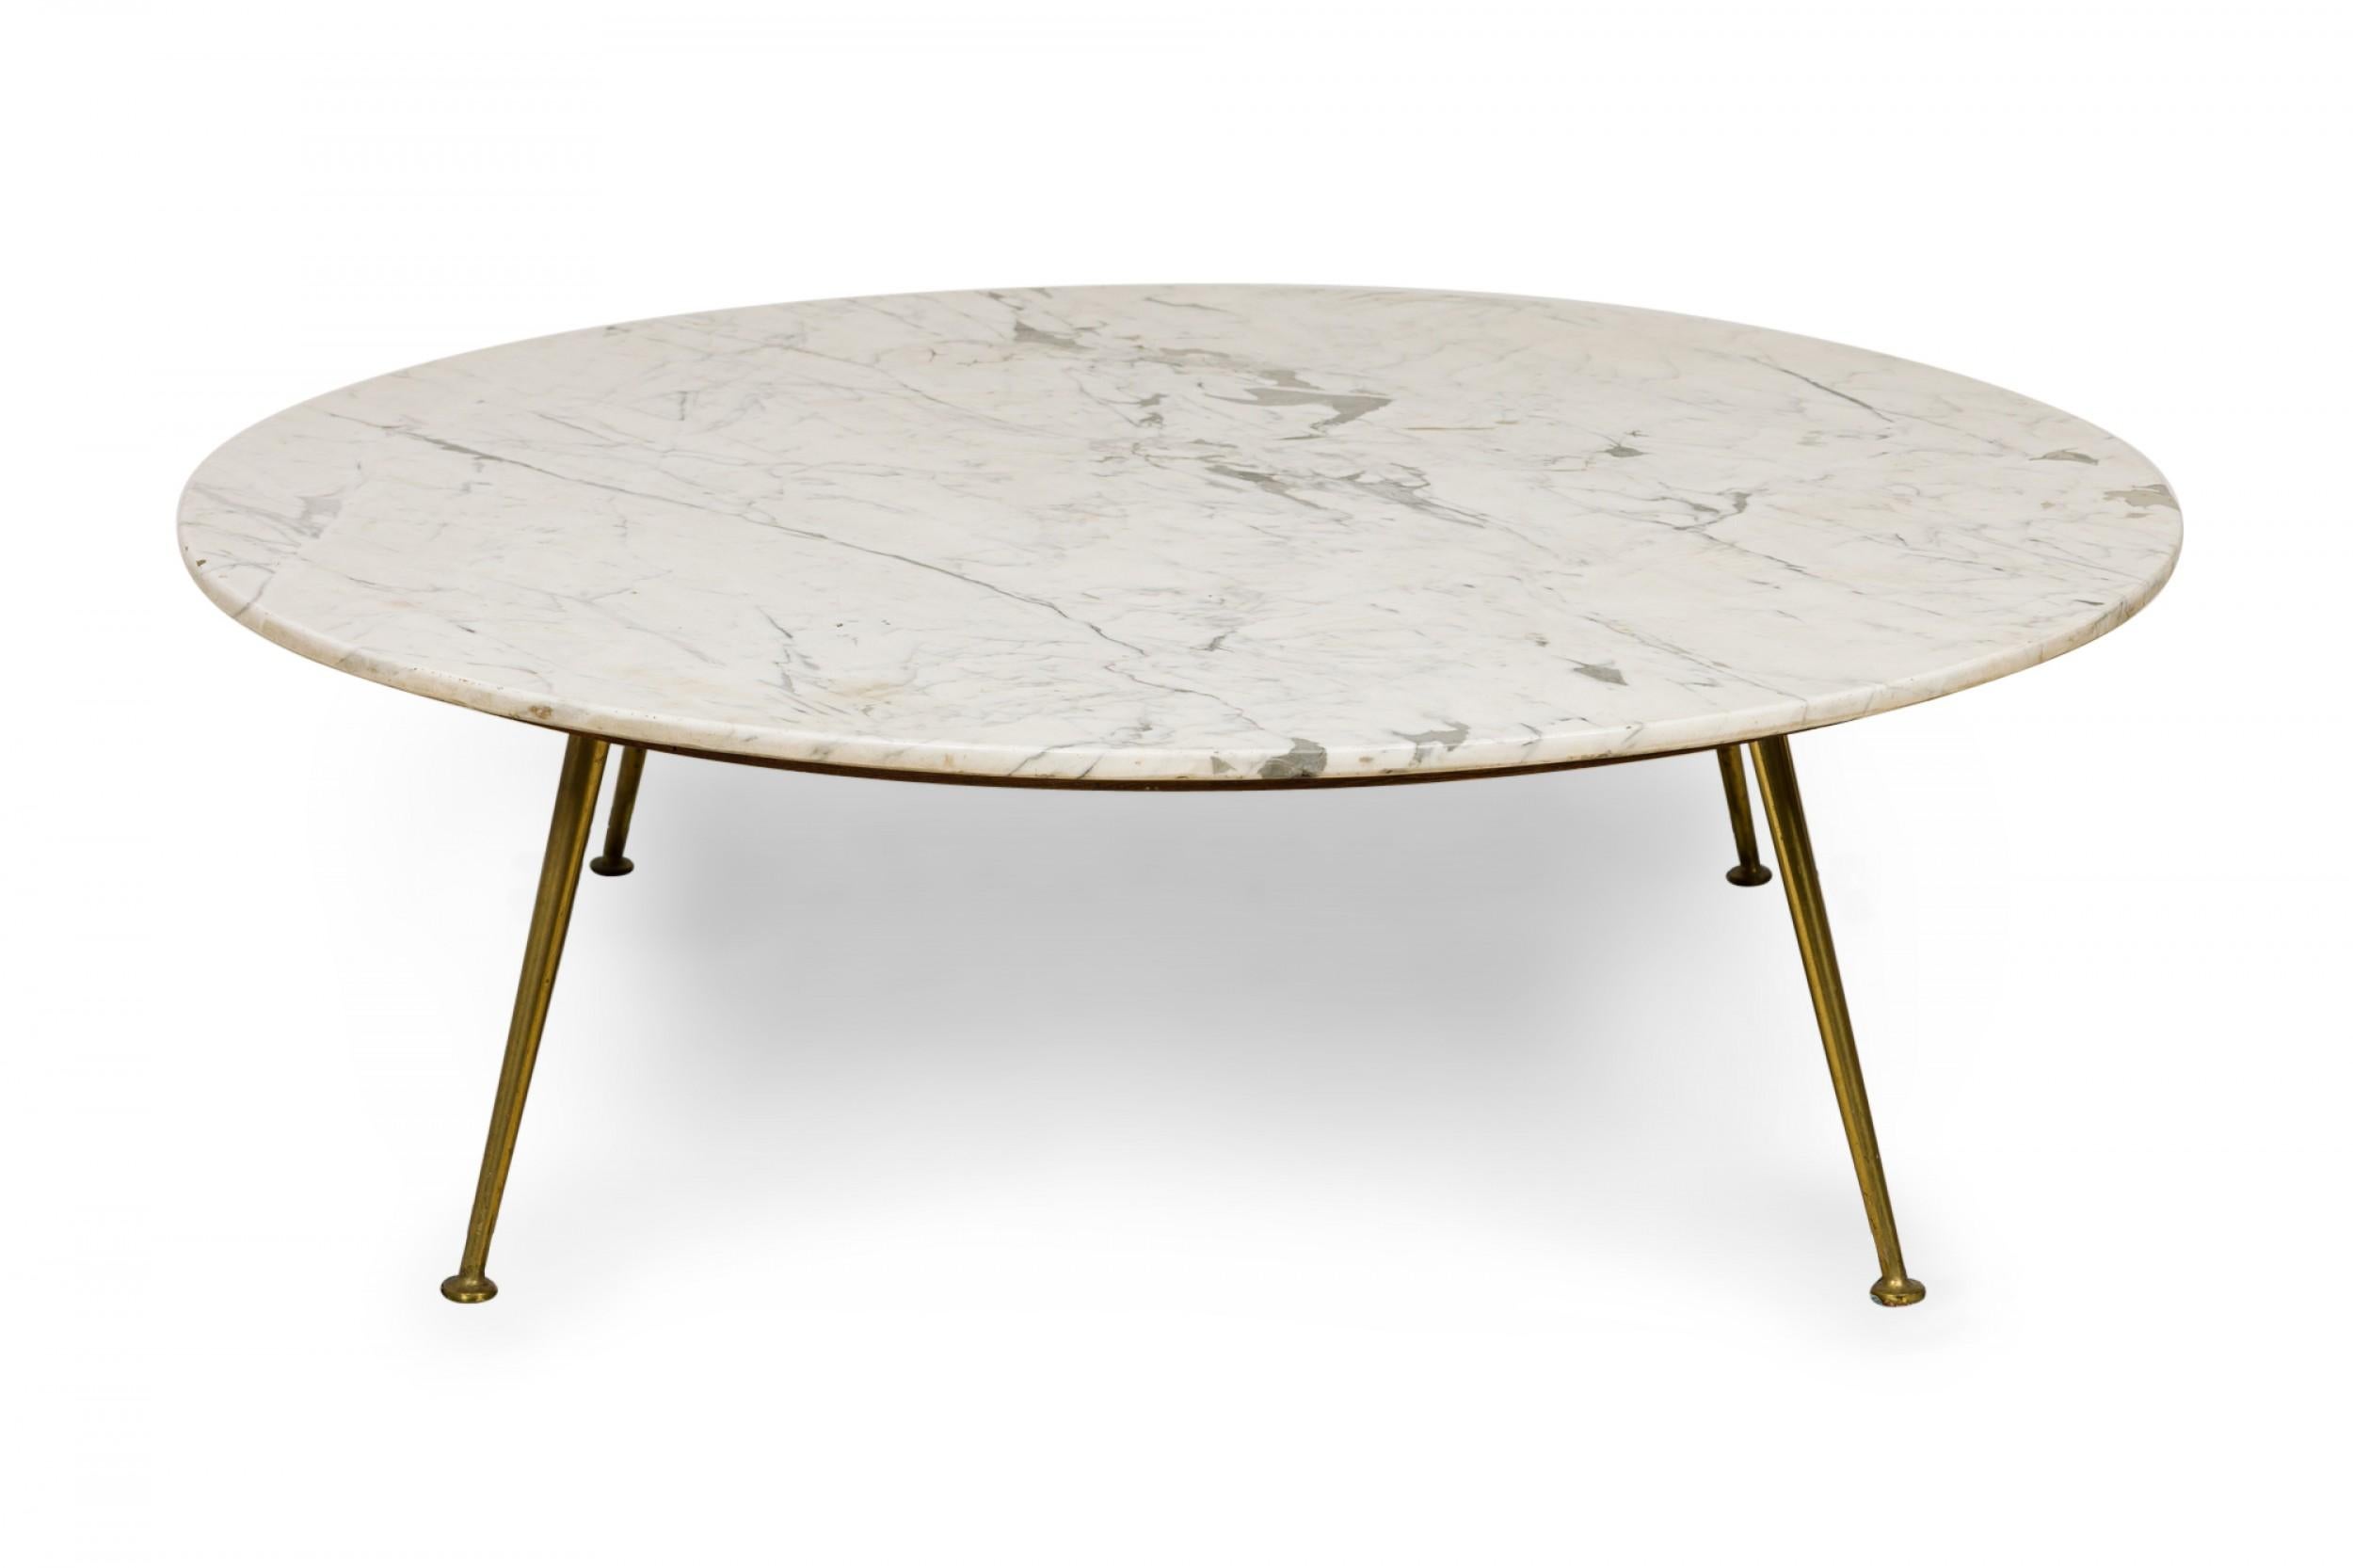 Italian mid-century circular cocktail / coffee table with a Carrera marble top resting on a wooden platform supported by three tapered brass legs ending in circular feet.
 